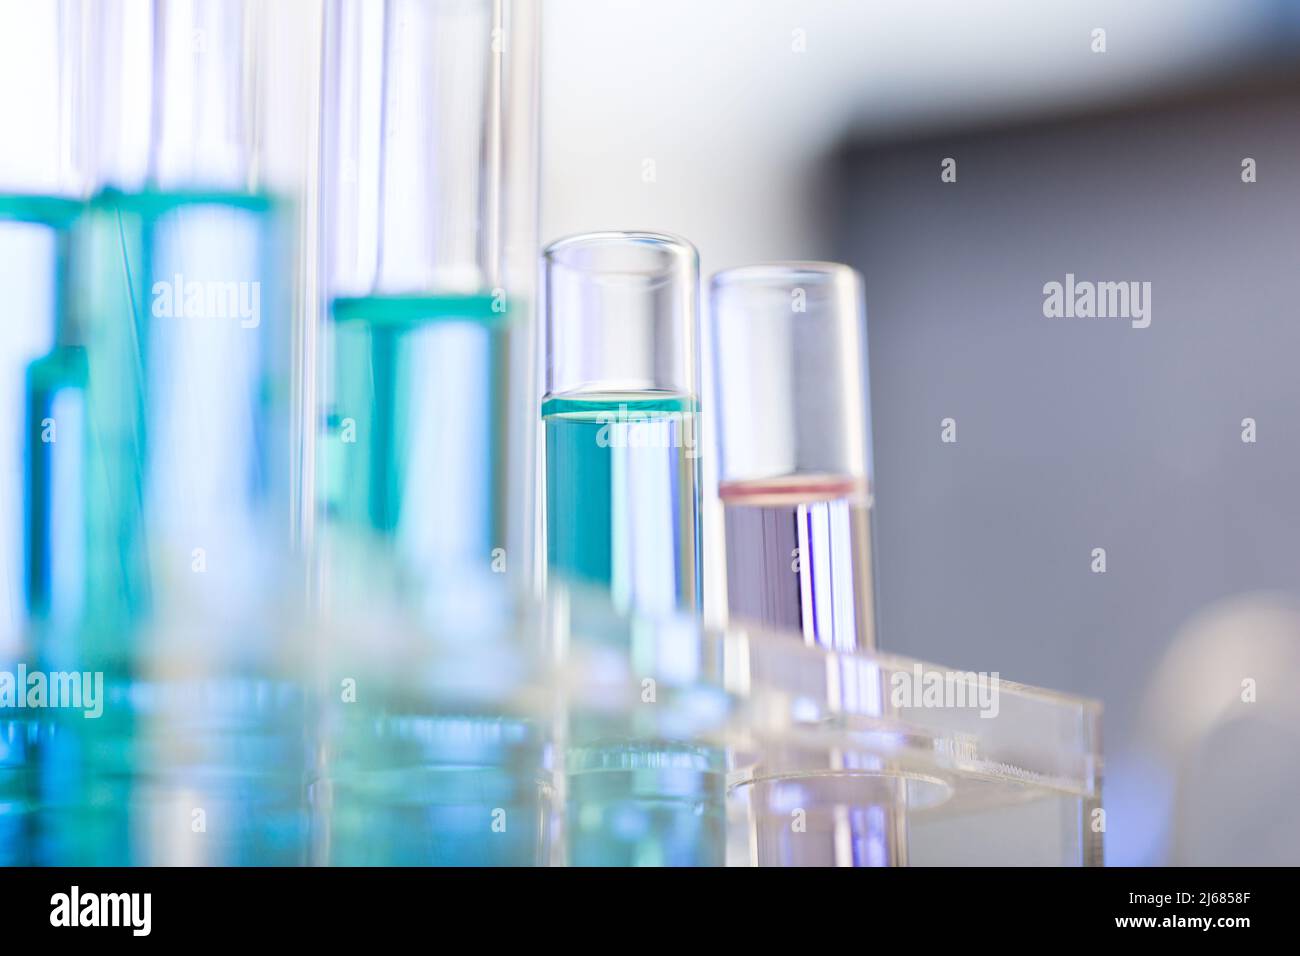 Neatly arranged test tubes containing blue and pink reagent in chemistry laboratory - stock photo Stock Photo